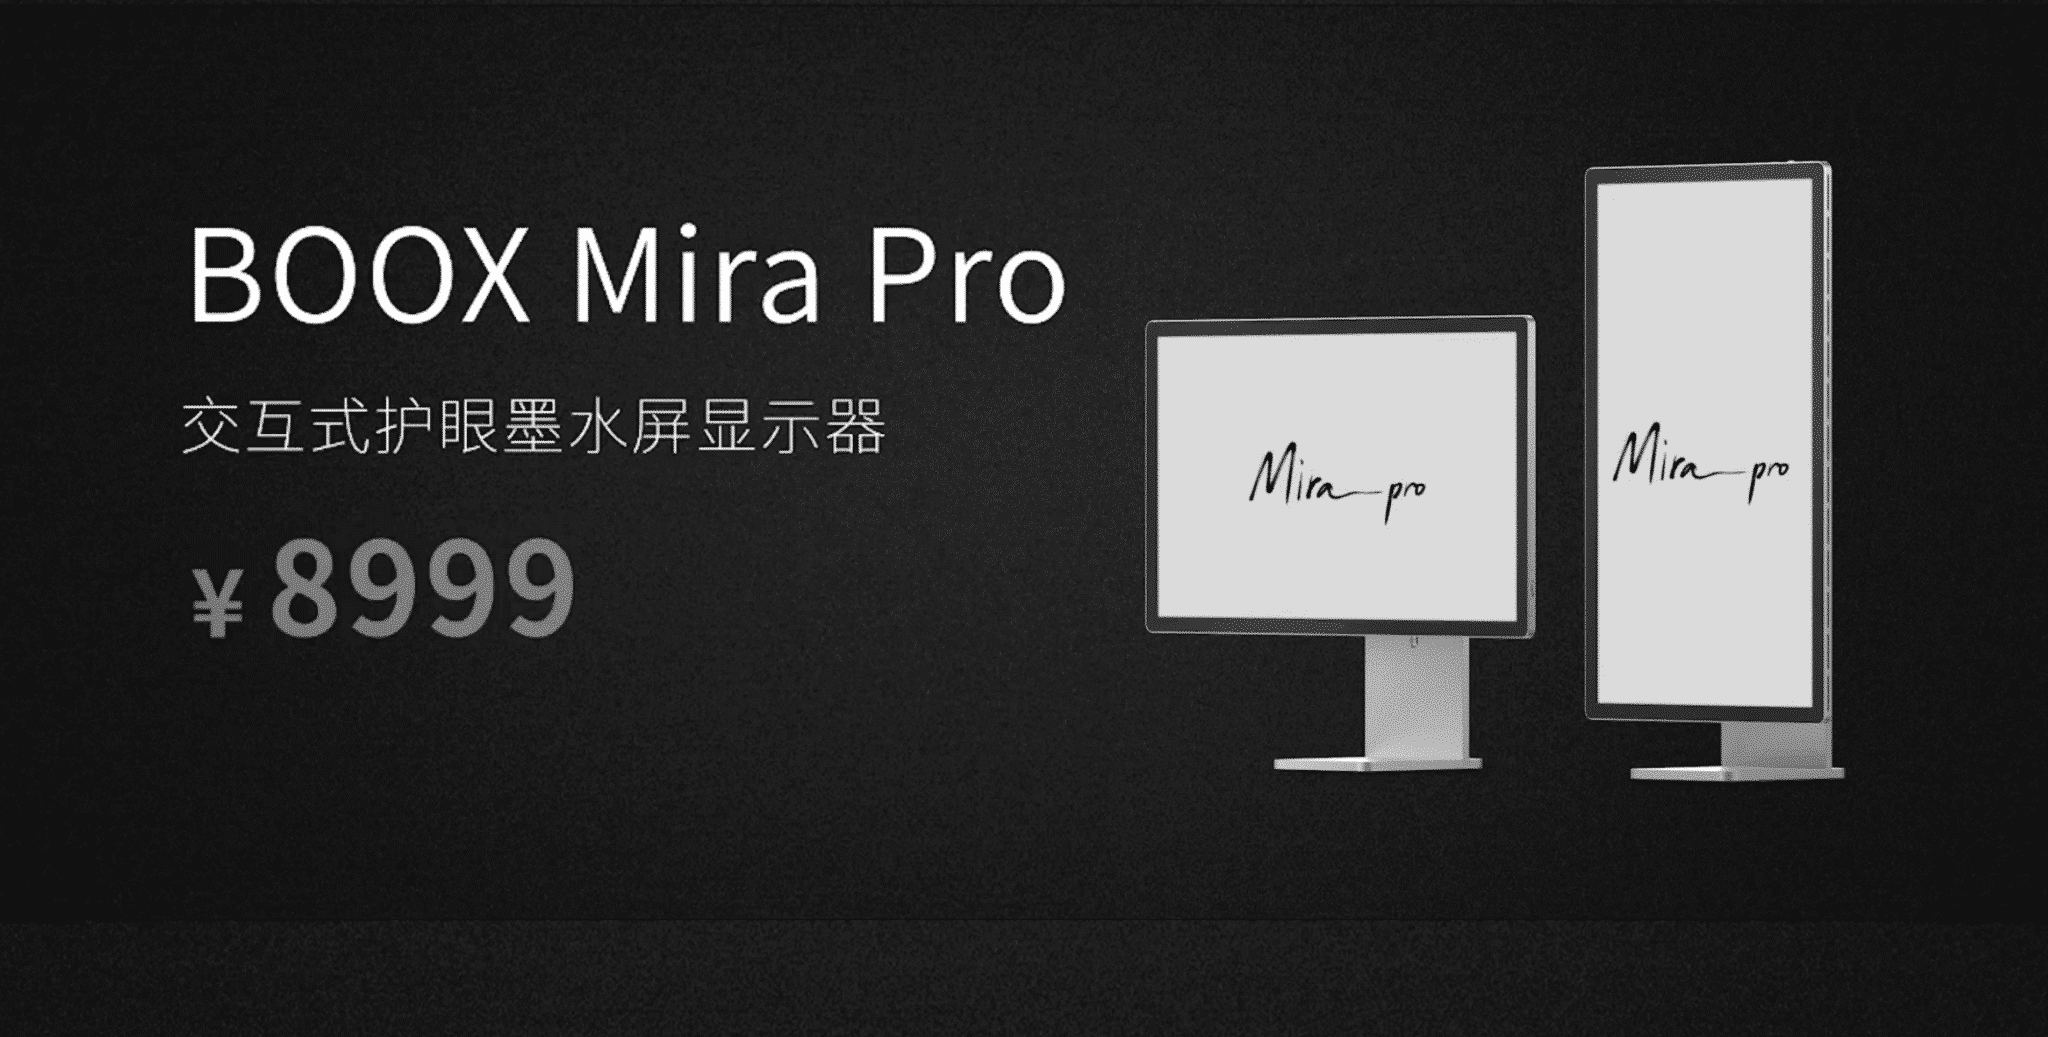 The Onyx Boox Mira Pro is a new 25 inch E INK monitor , equipped with Aragonite’s self-developed BSR super refresh technology, with a screen-to-